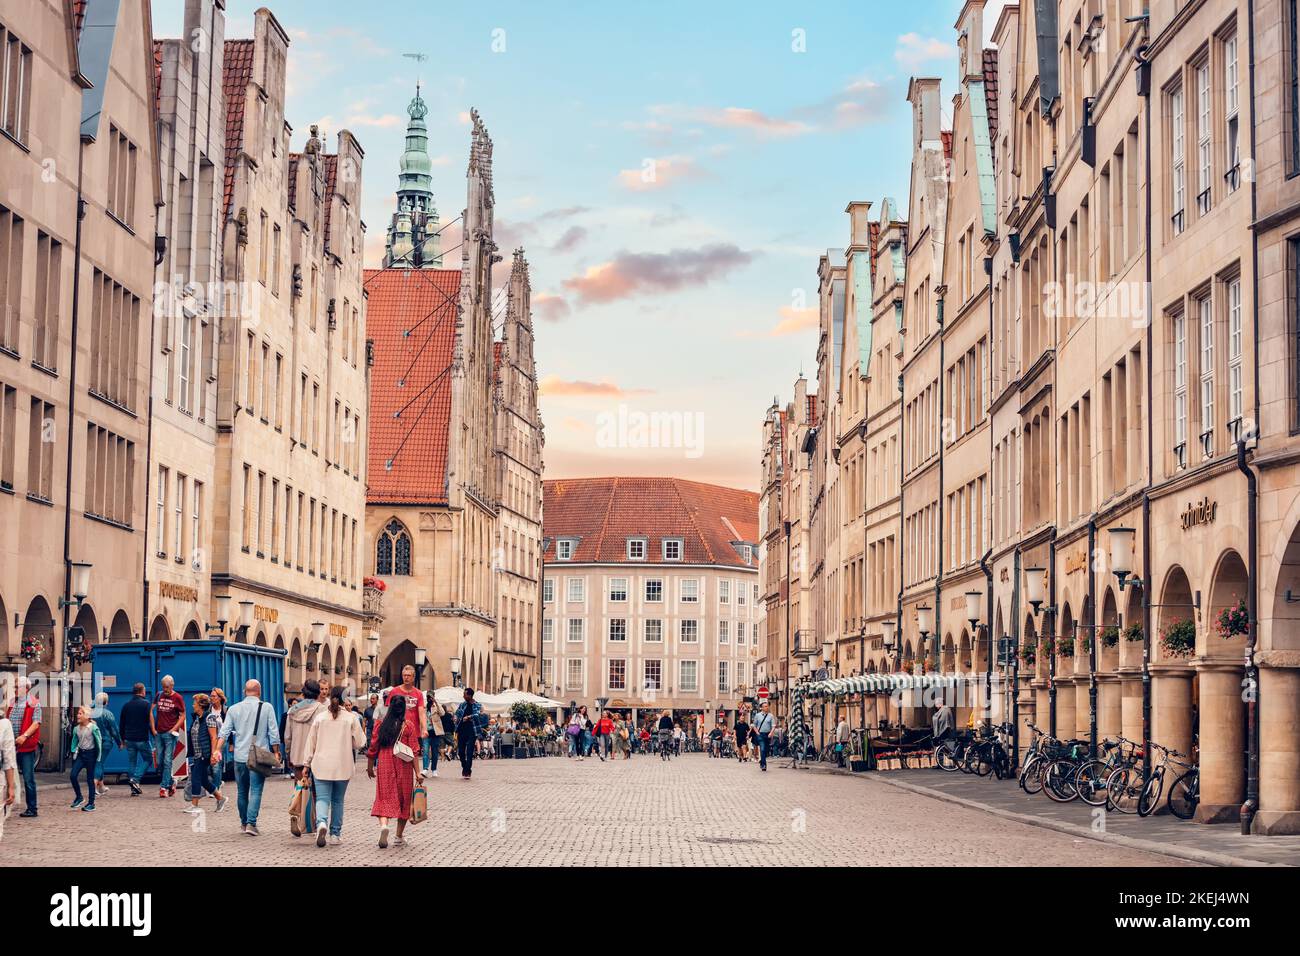 26 July 2022, Munster, Germany: Old houses with exquisite gables on the Prinzipalmarkt street where numerous shops and galleries are located. Travel a Stock Photo